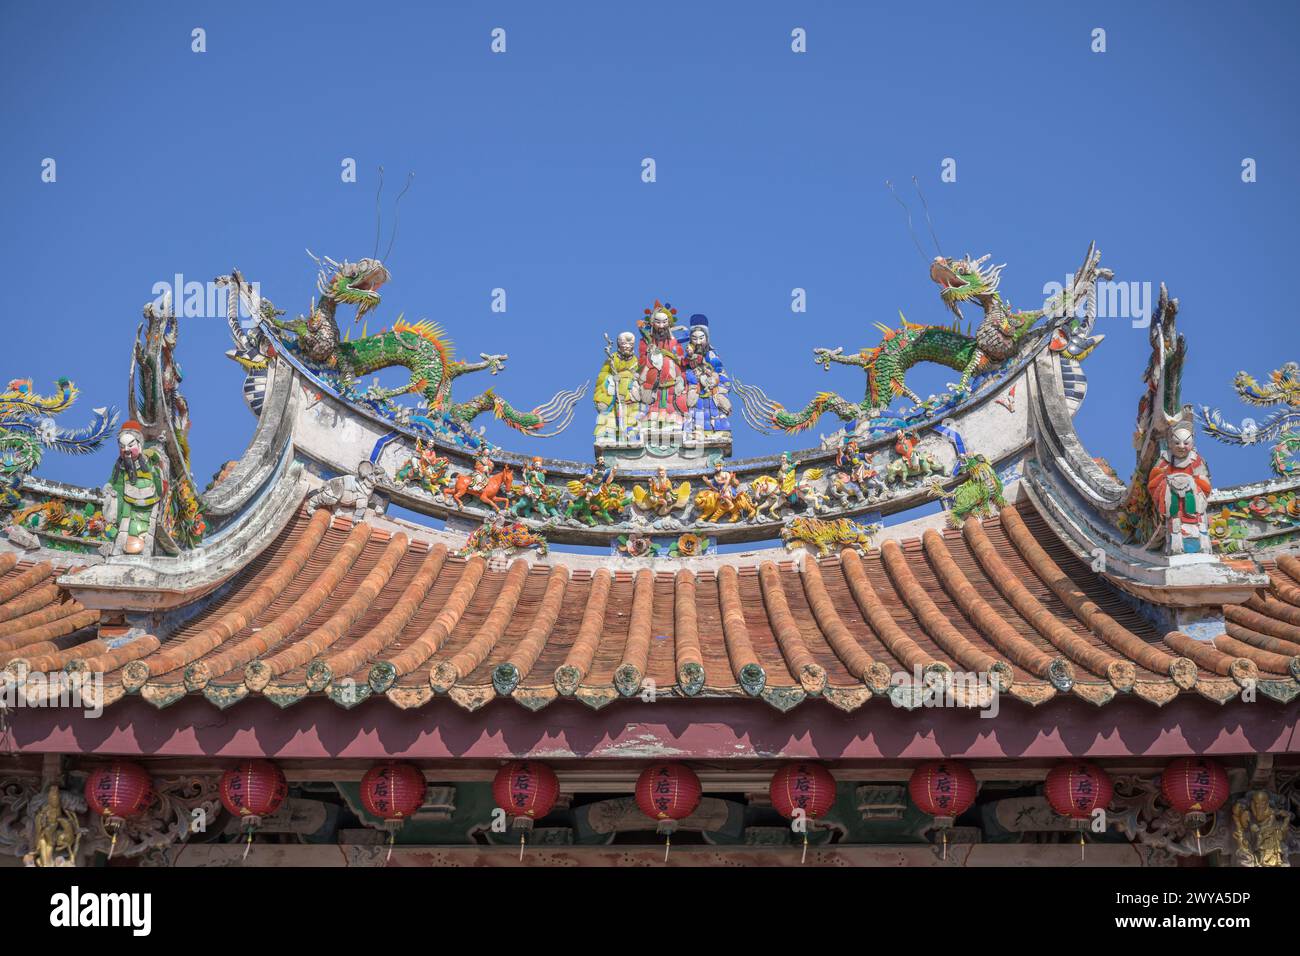 A vivid display of traditional Chinese temple roof decorations with mythical creatures against a clear blue sky in Mazu temple Stock Photo